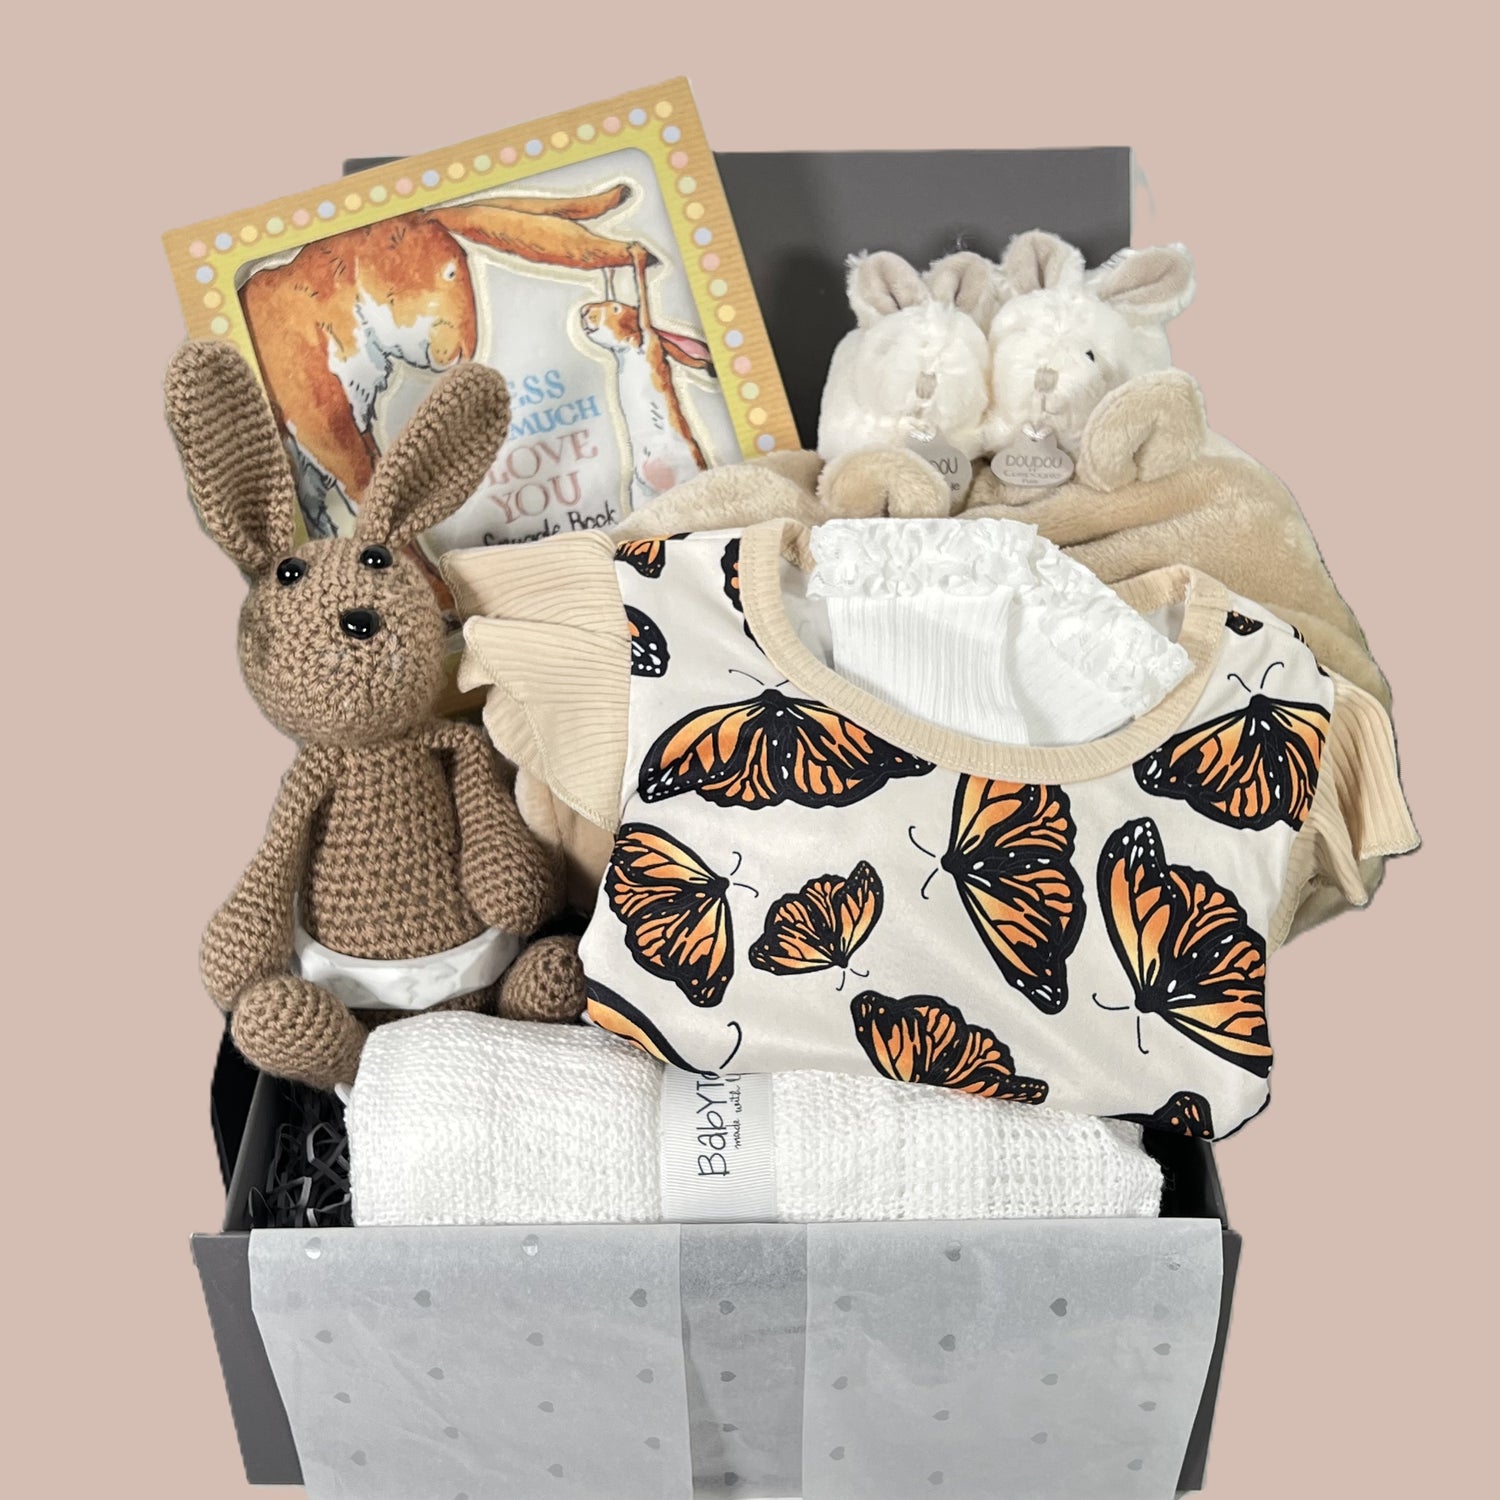 New baby girl hamper gift box with a butterfly romper, a baby dressing gown , a pair of Doudou Et Champagnie baby slippers, a Guess how much I love you snuggle soft baby book, a white cotton cellular baby blanket and a crocheted bunny baby.